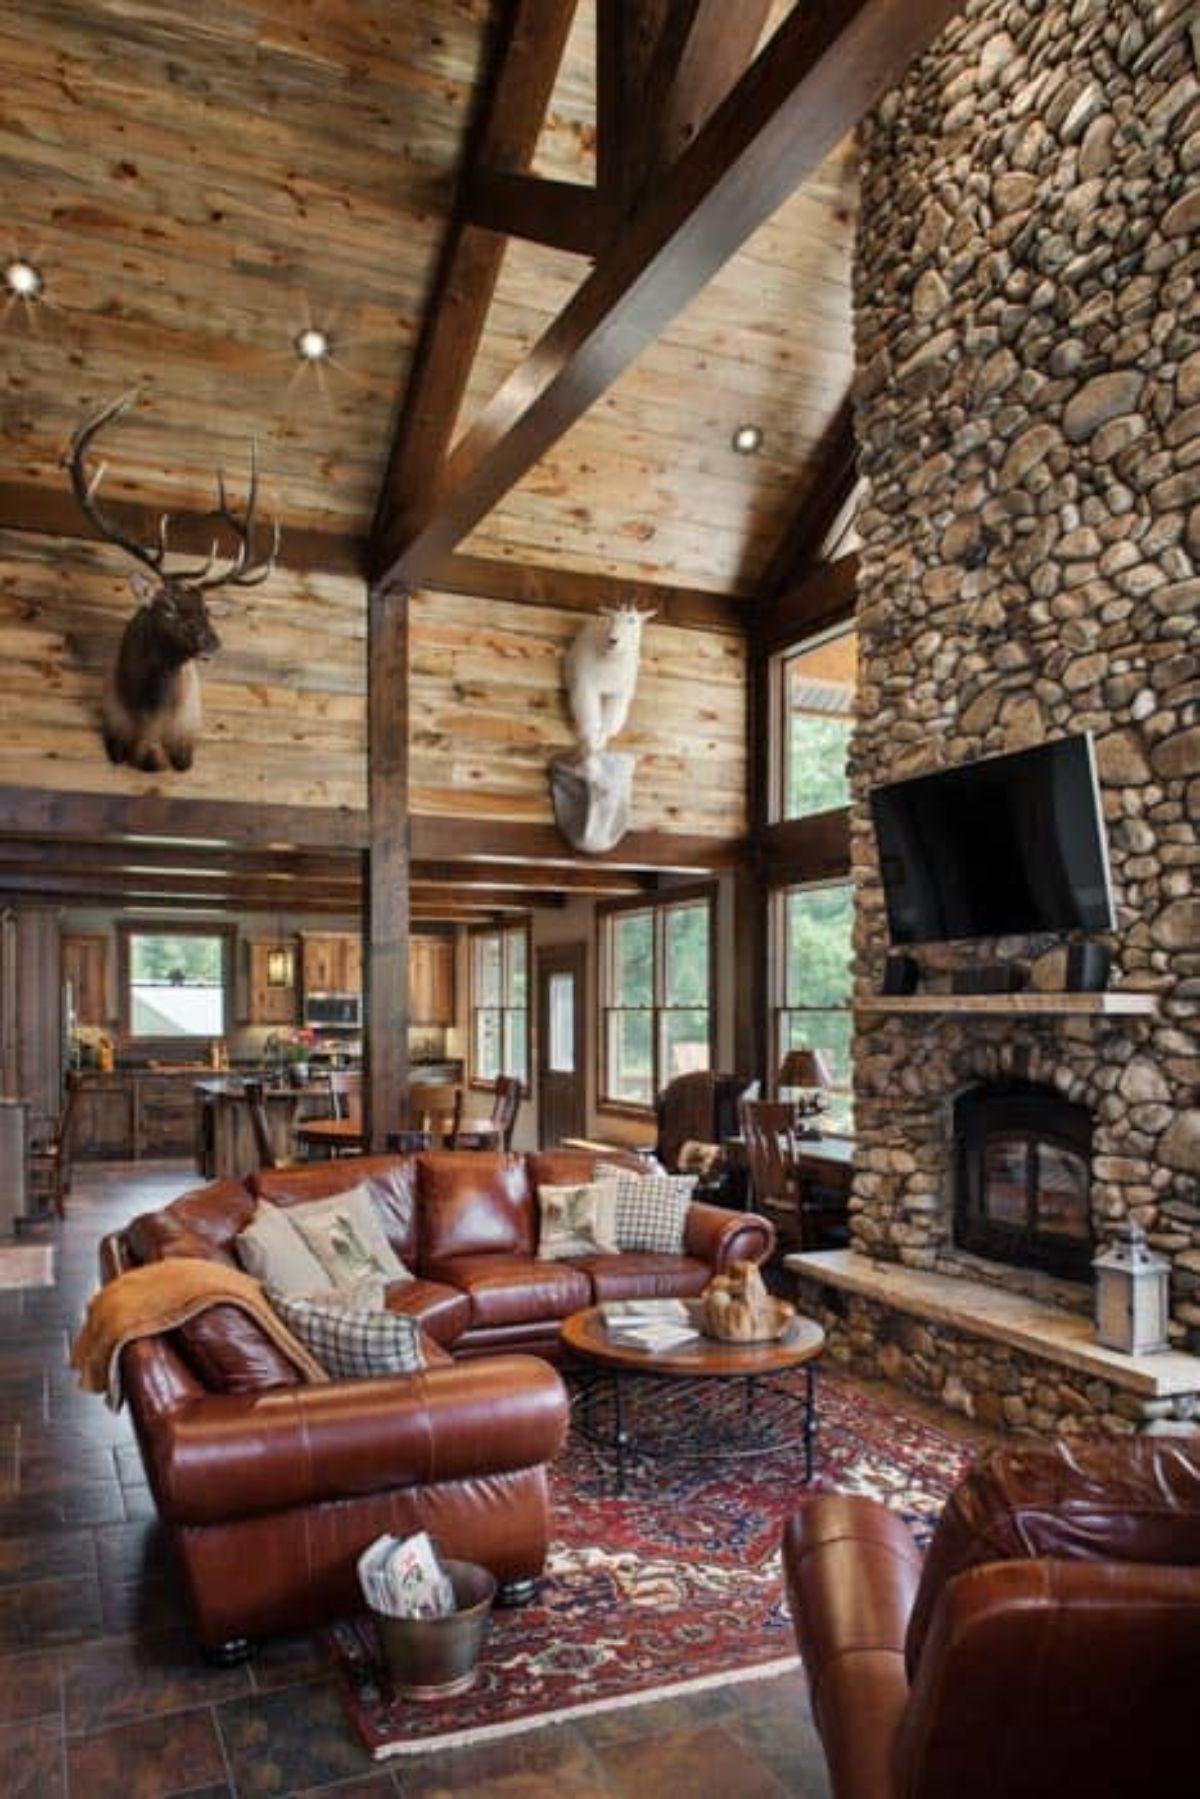 stone fireplace onr ight of image with brown leather sofa in front